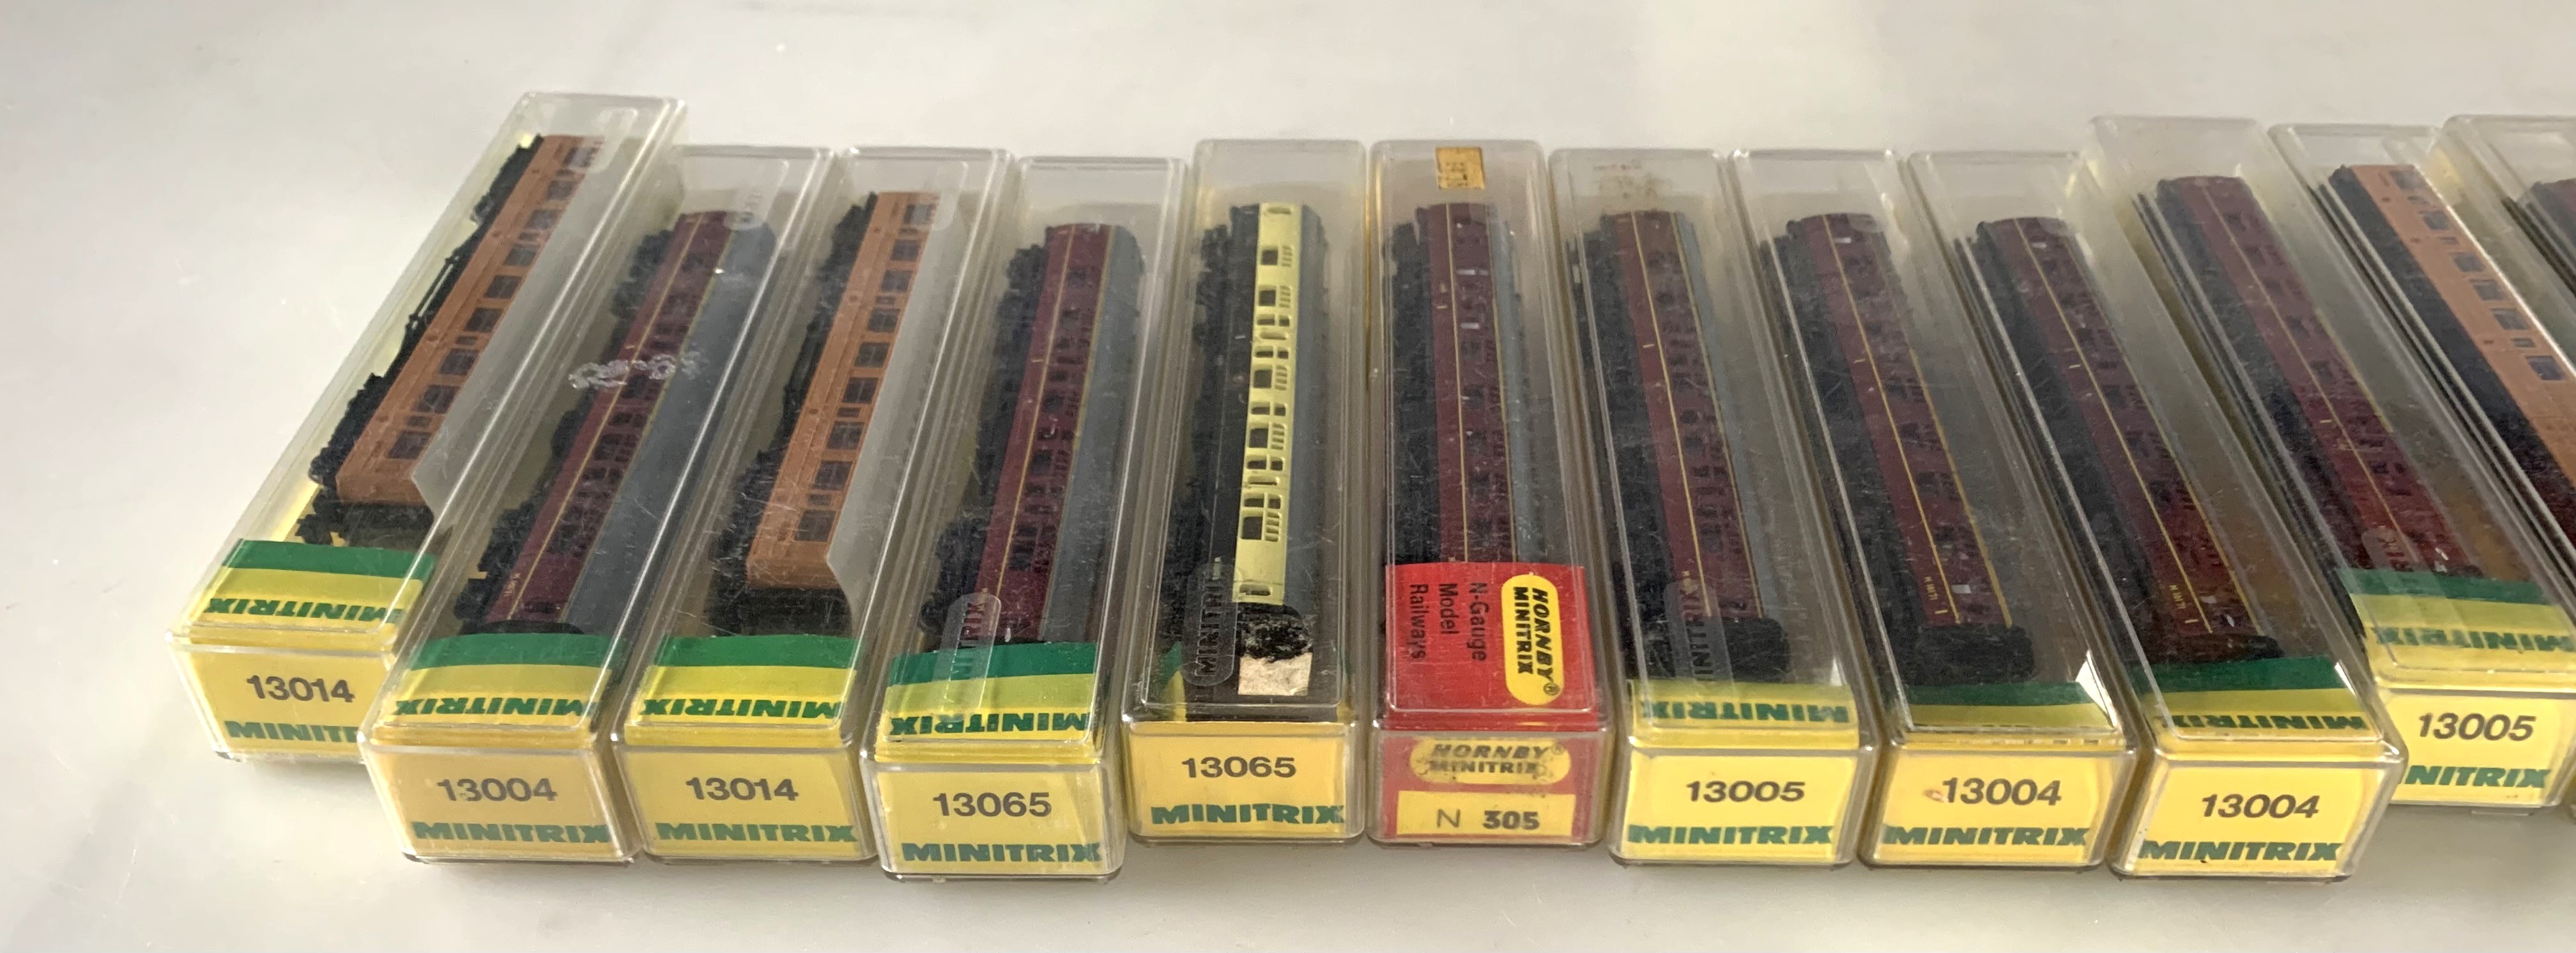 Hornby Minitrix railway carriages - Image 4 of 6